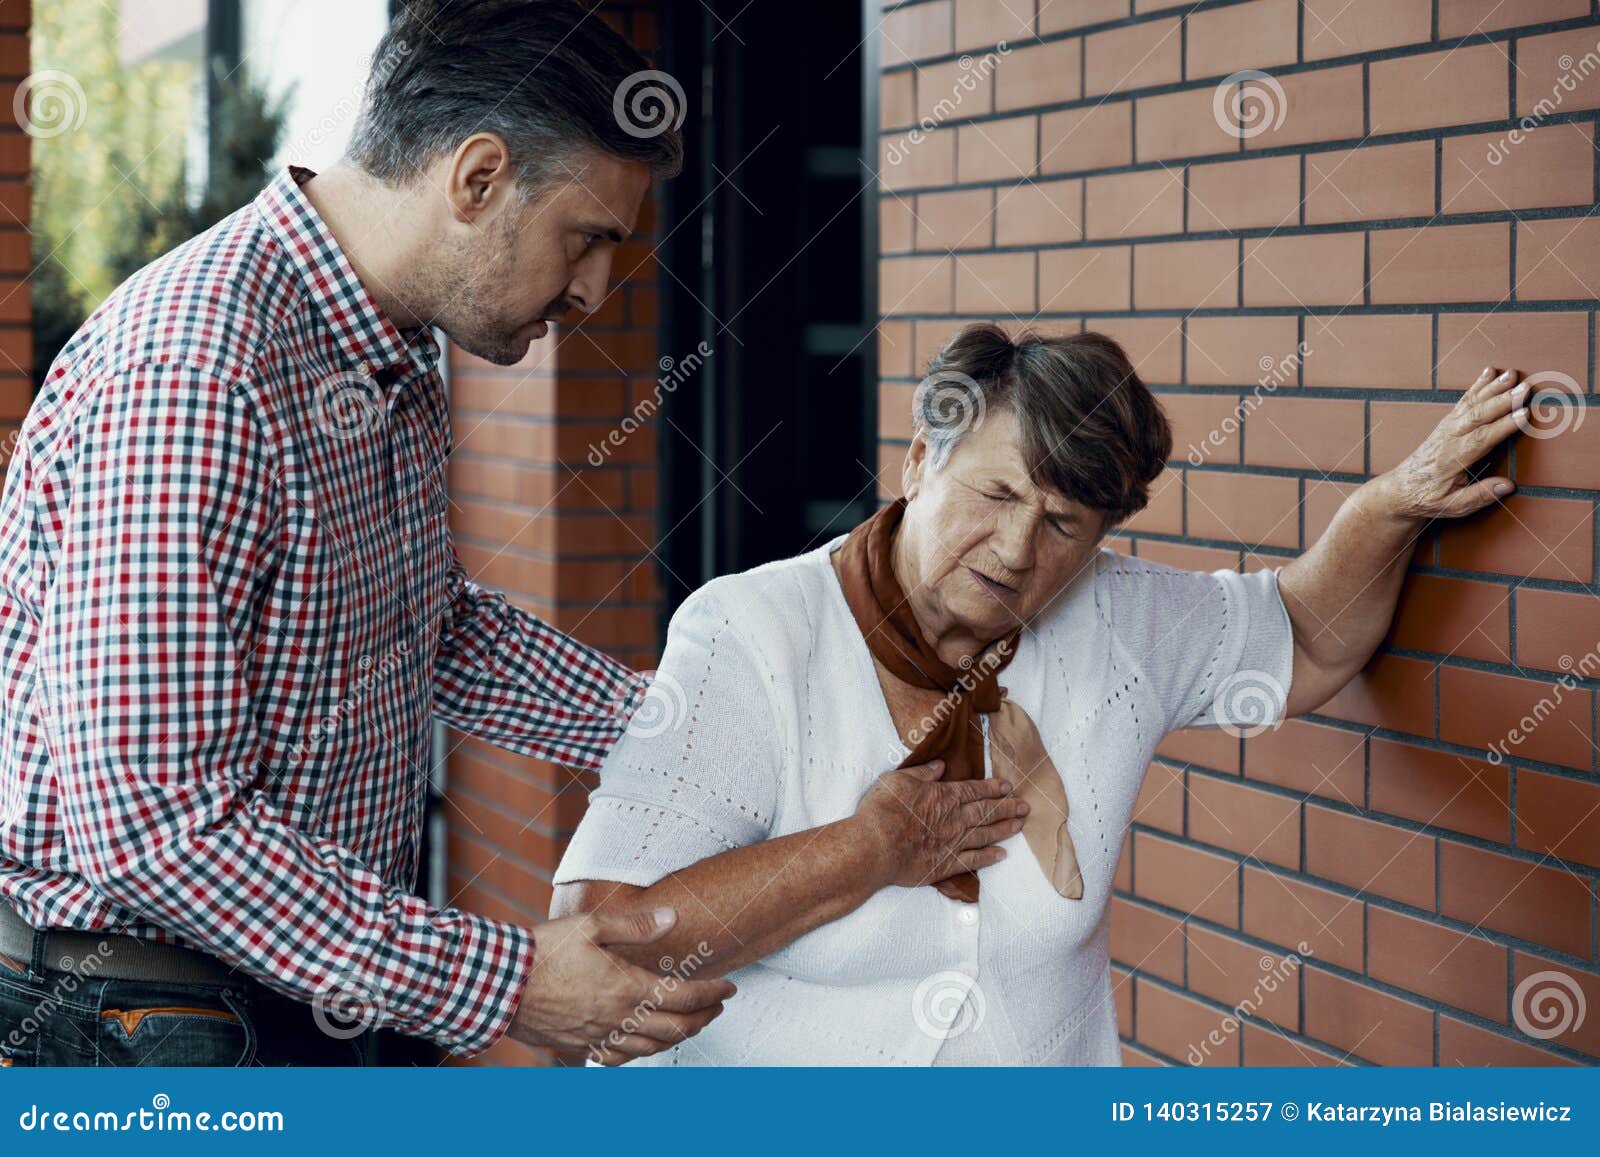 son trying to help his mother who is having shortness of breath